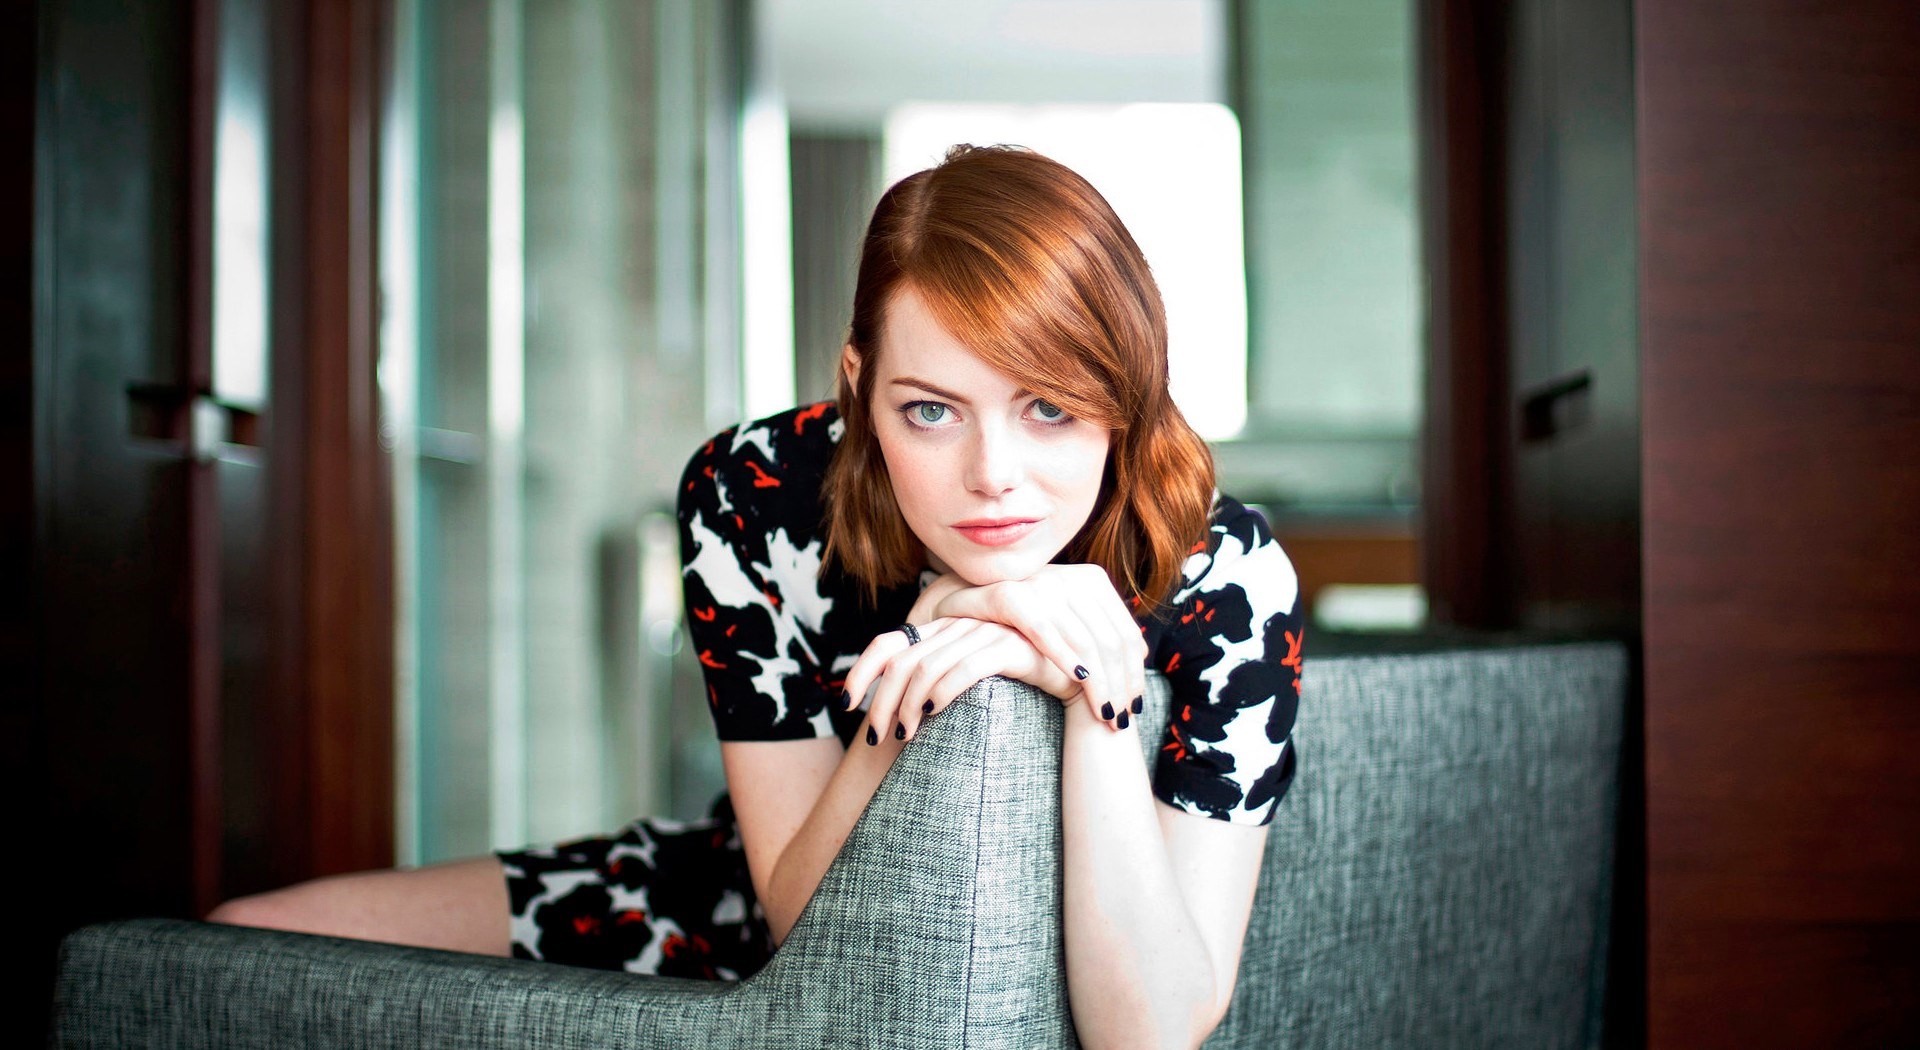 download emma stone lovely pose in sofa back still free mobile hd background wallpaper